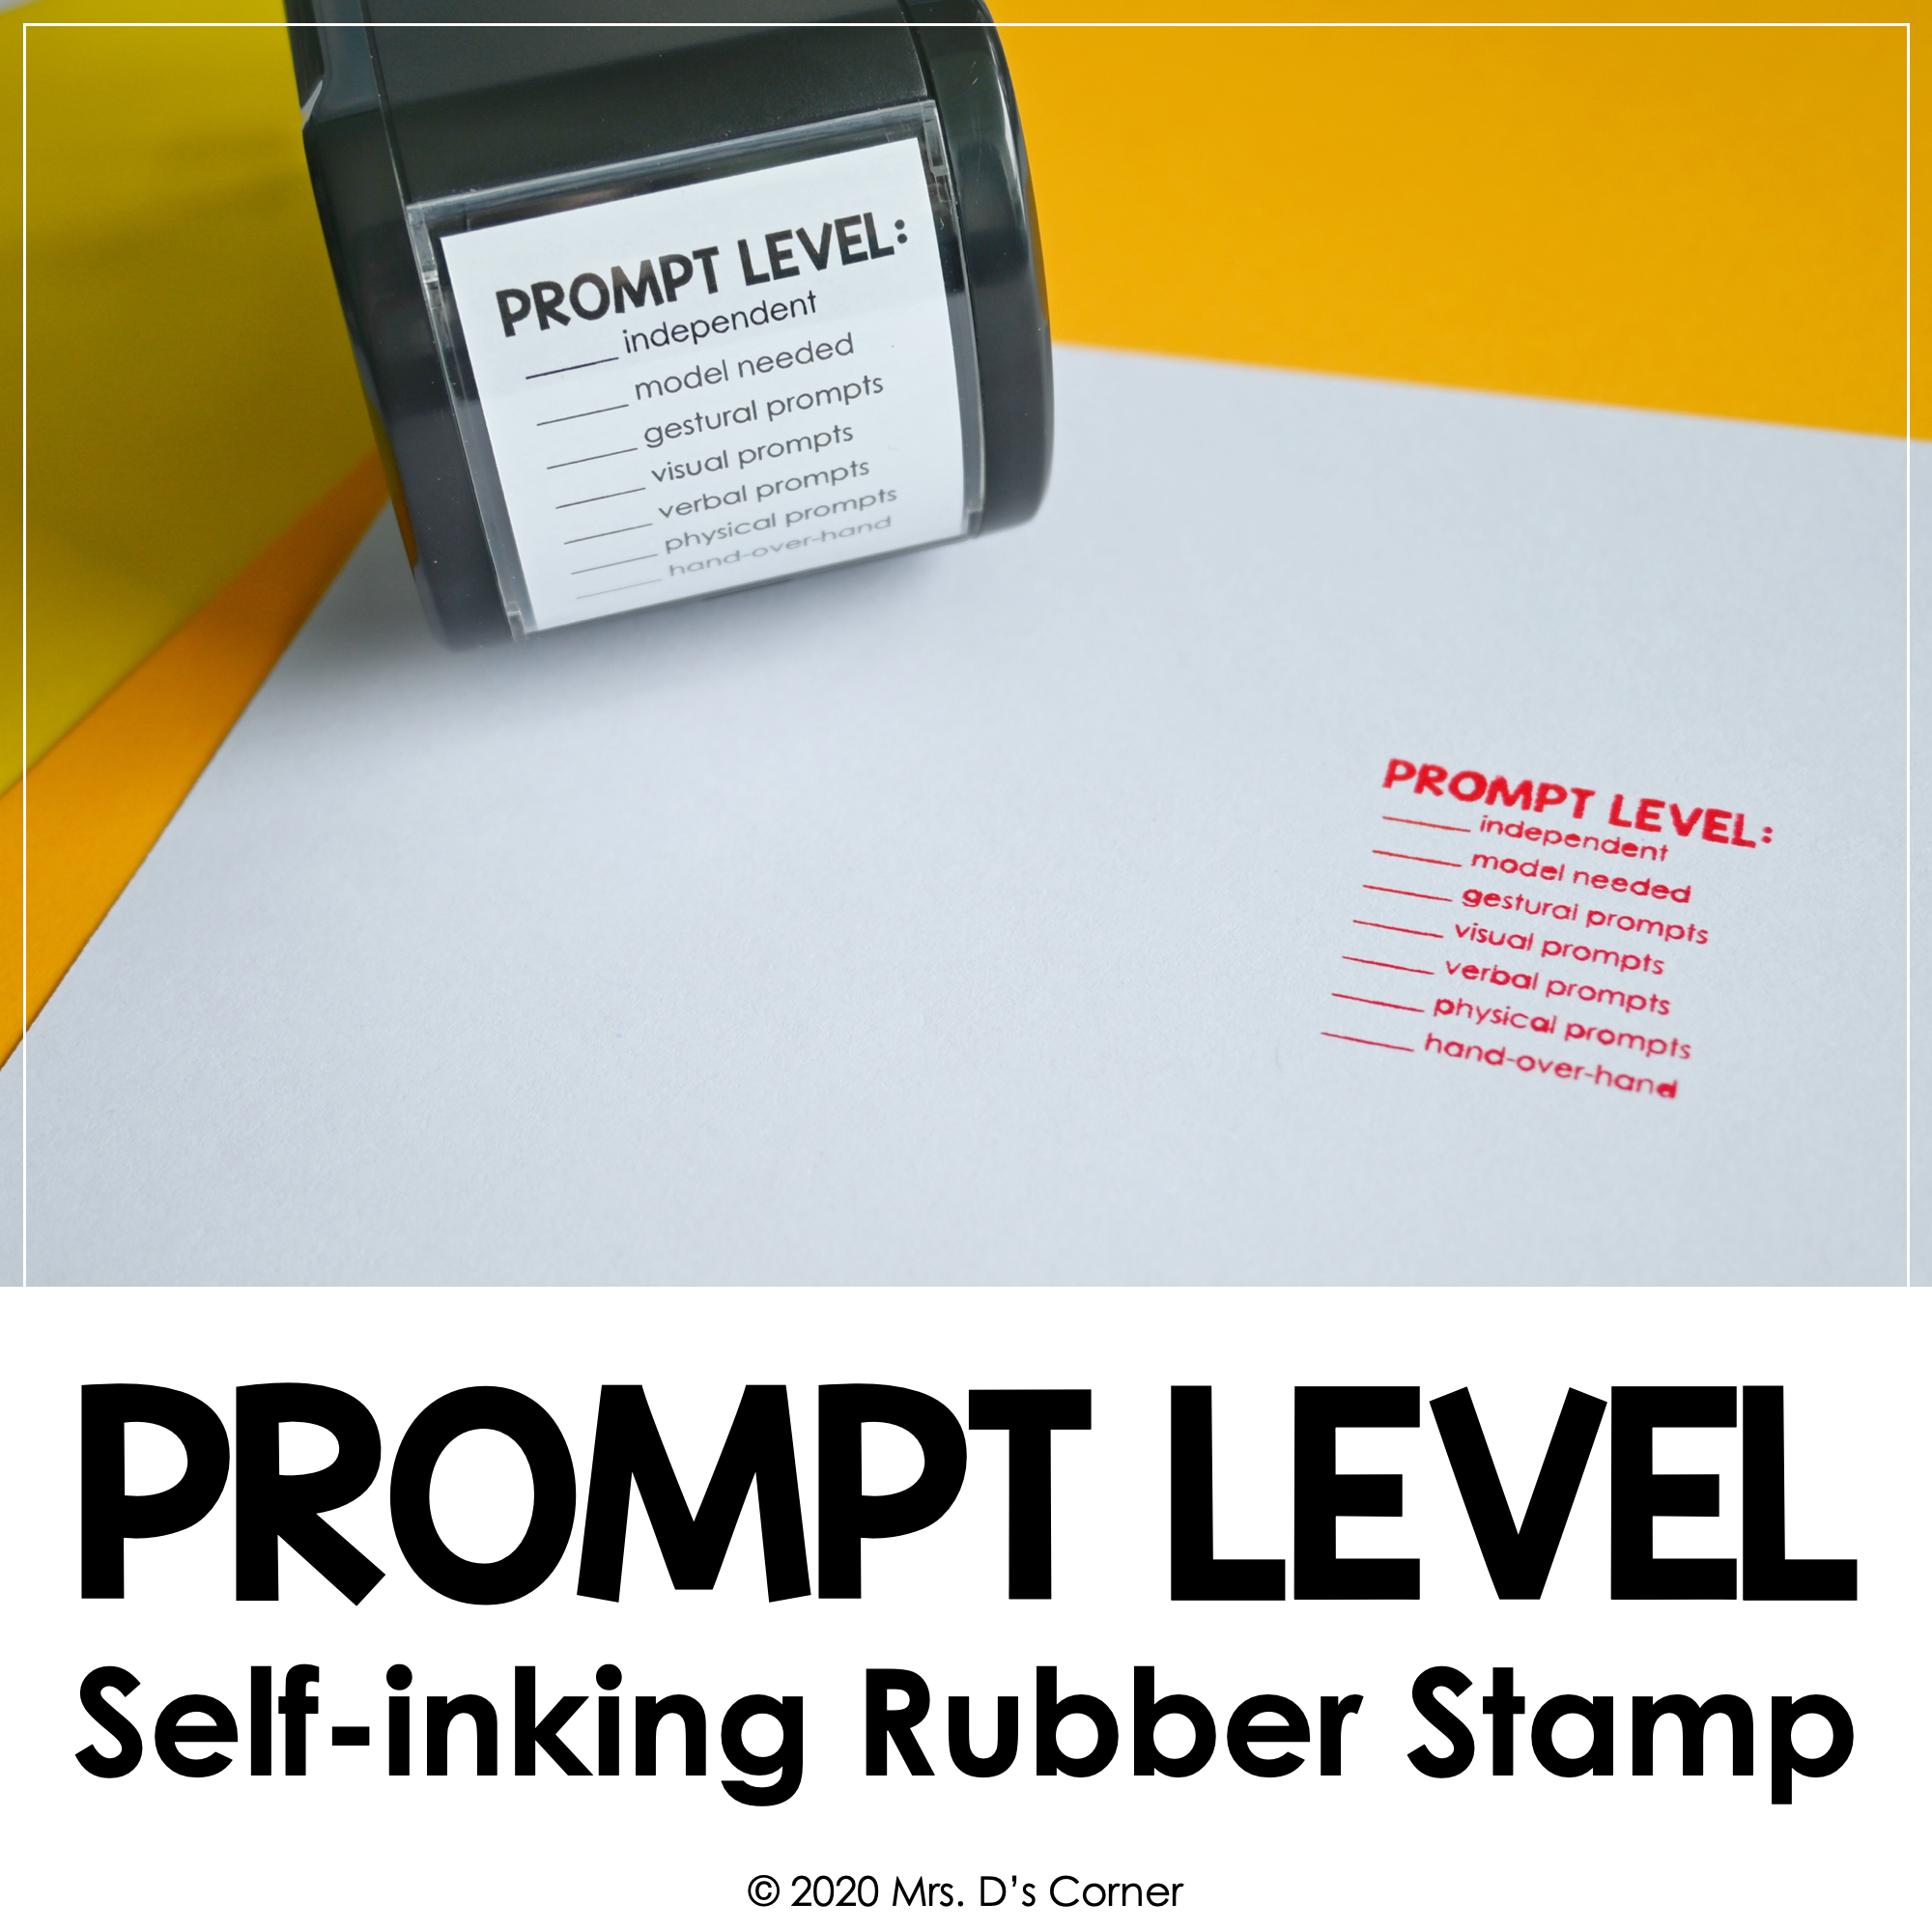 Prompt Level Self-inking Rubber Stamp